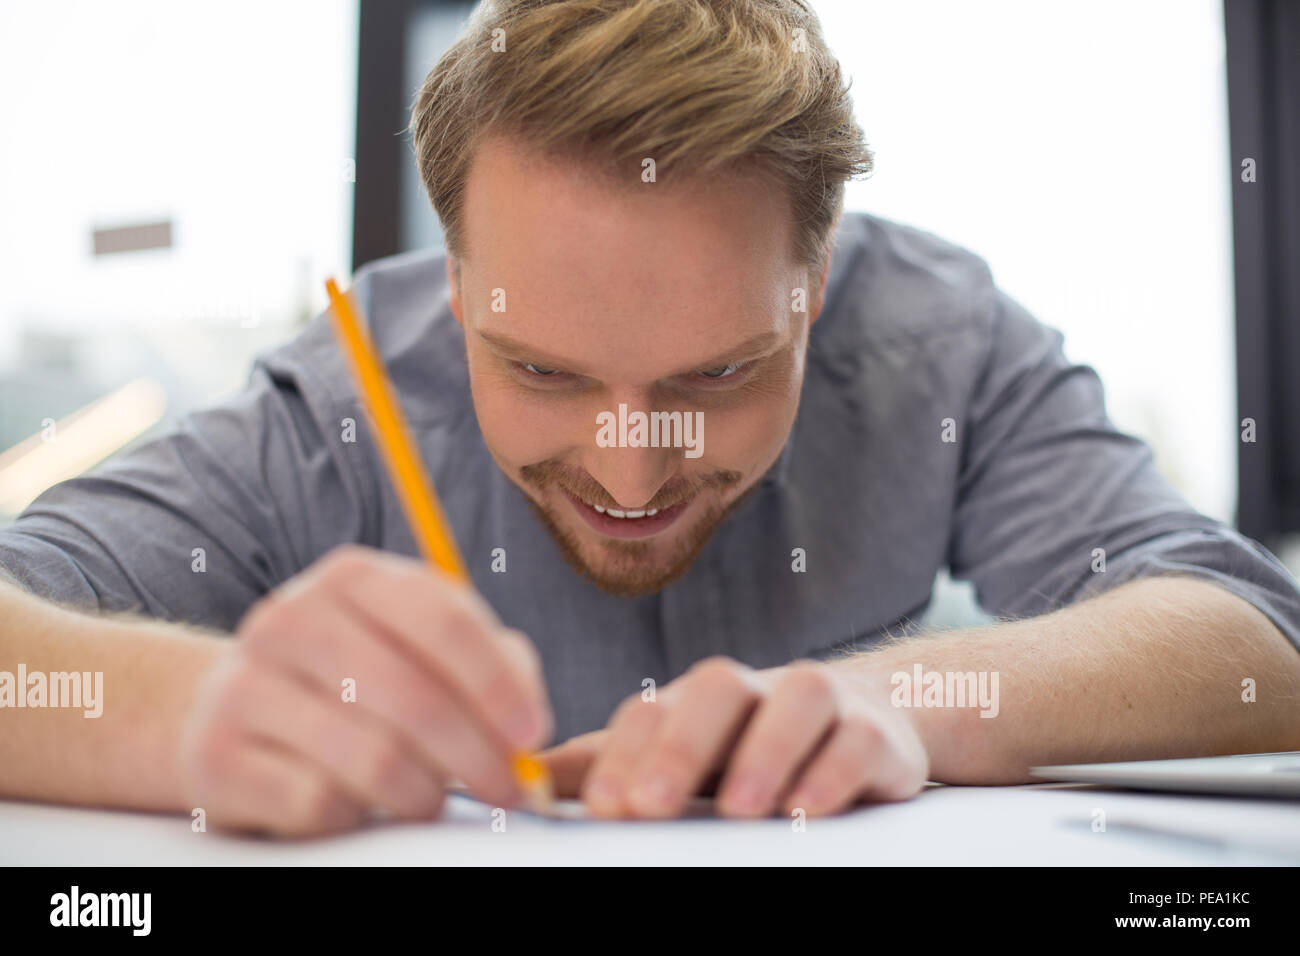 Pleasurable job. Joyful nice delighted man sitting at the table and doing a drawing while concentrating on his work Stock Photo